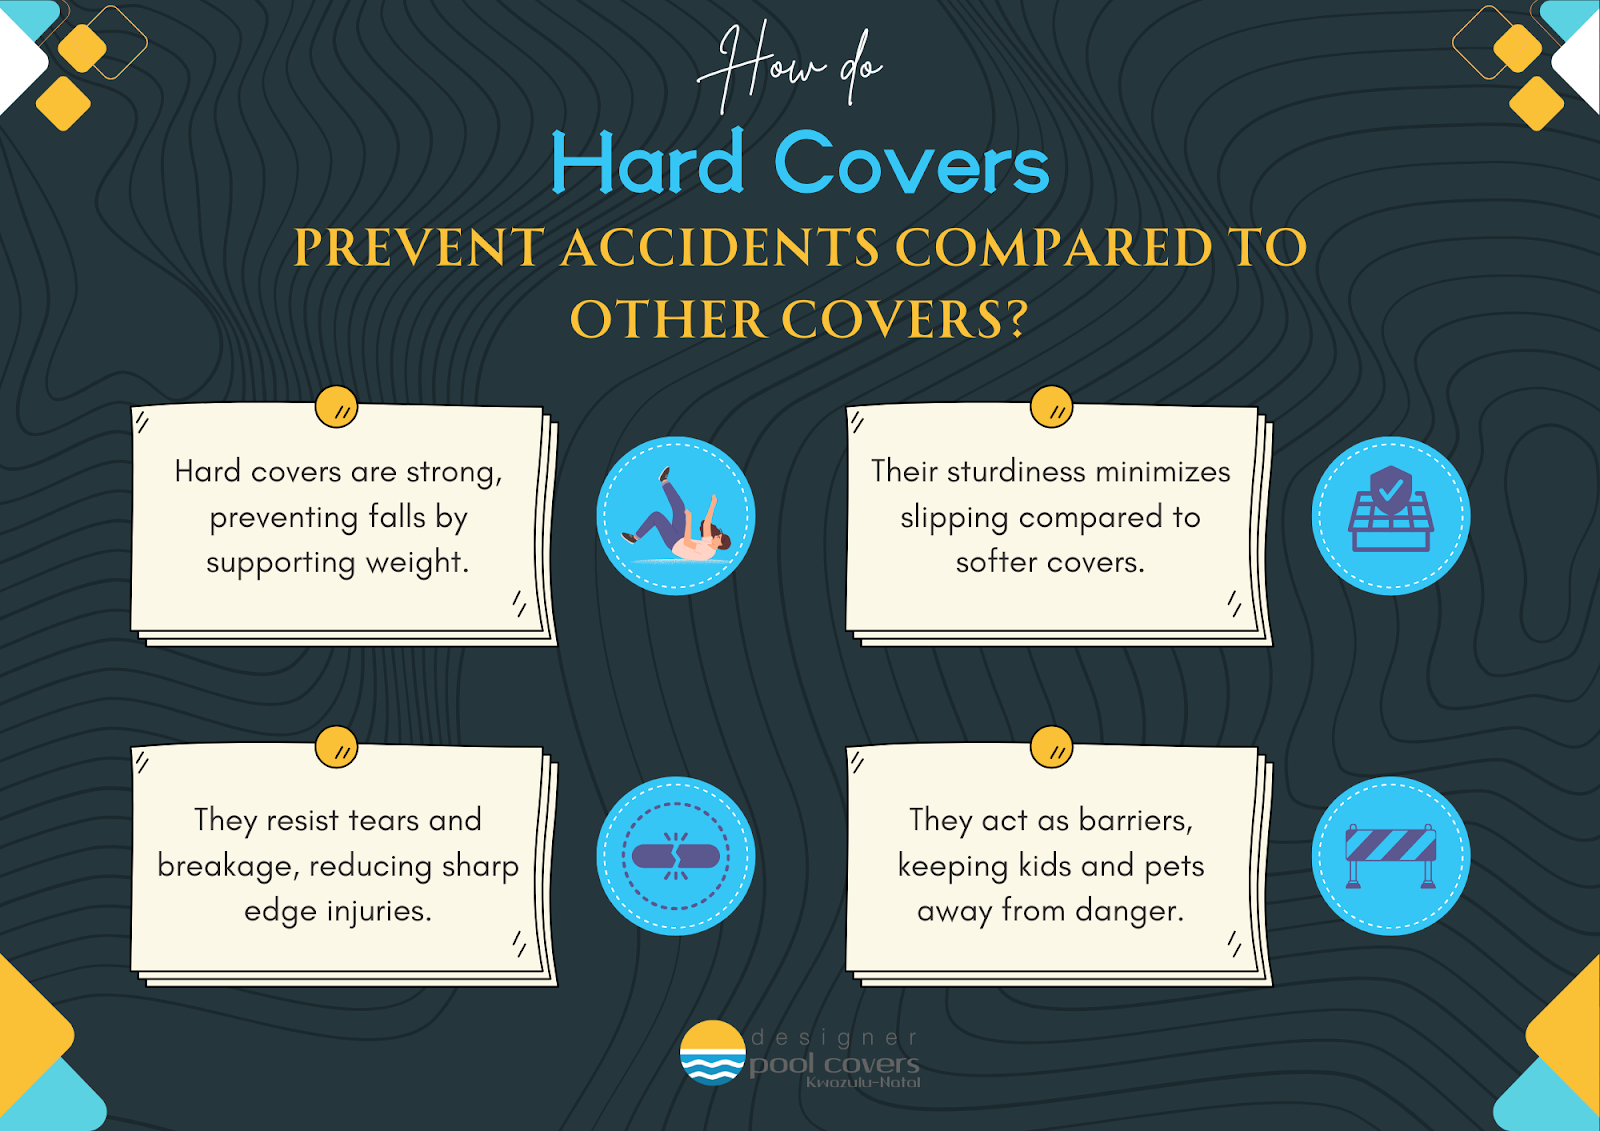 How do hard covers Prevent Accidents Compared to Other Covers?
